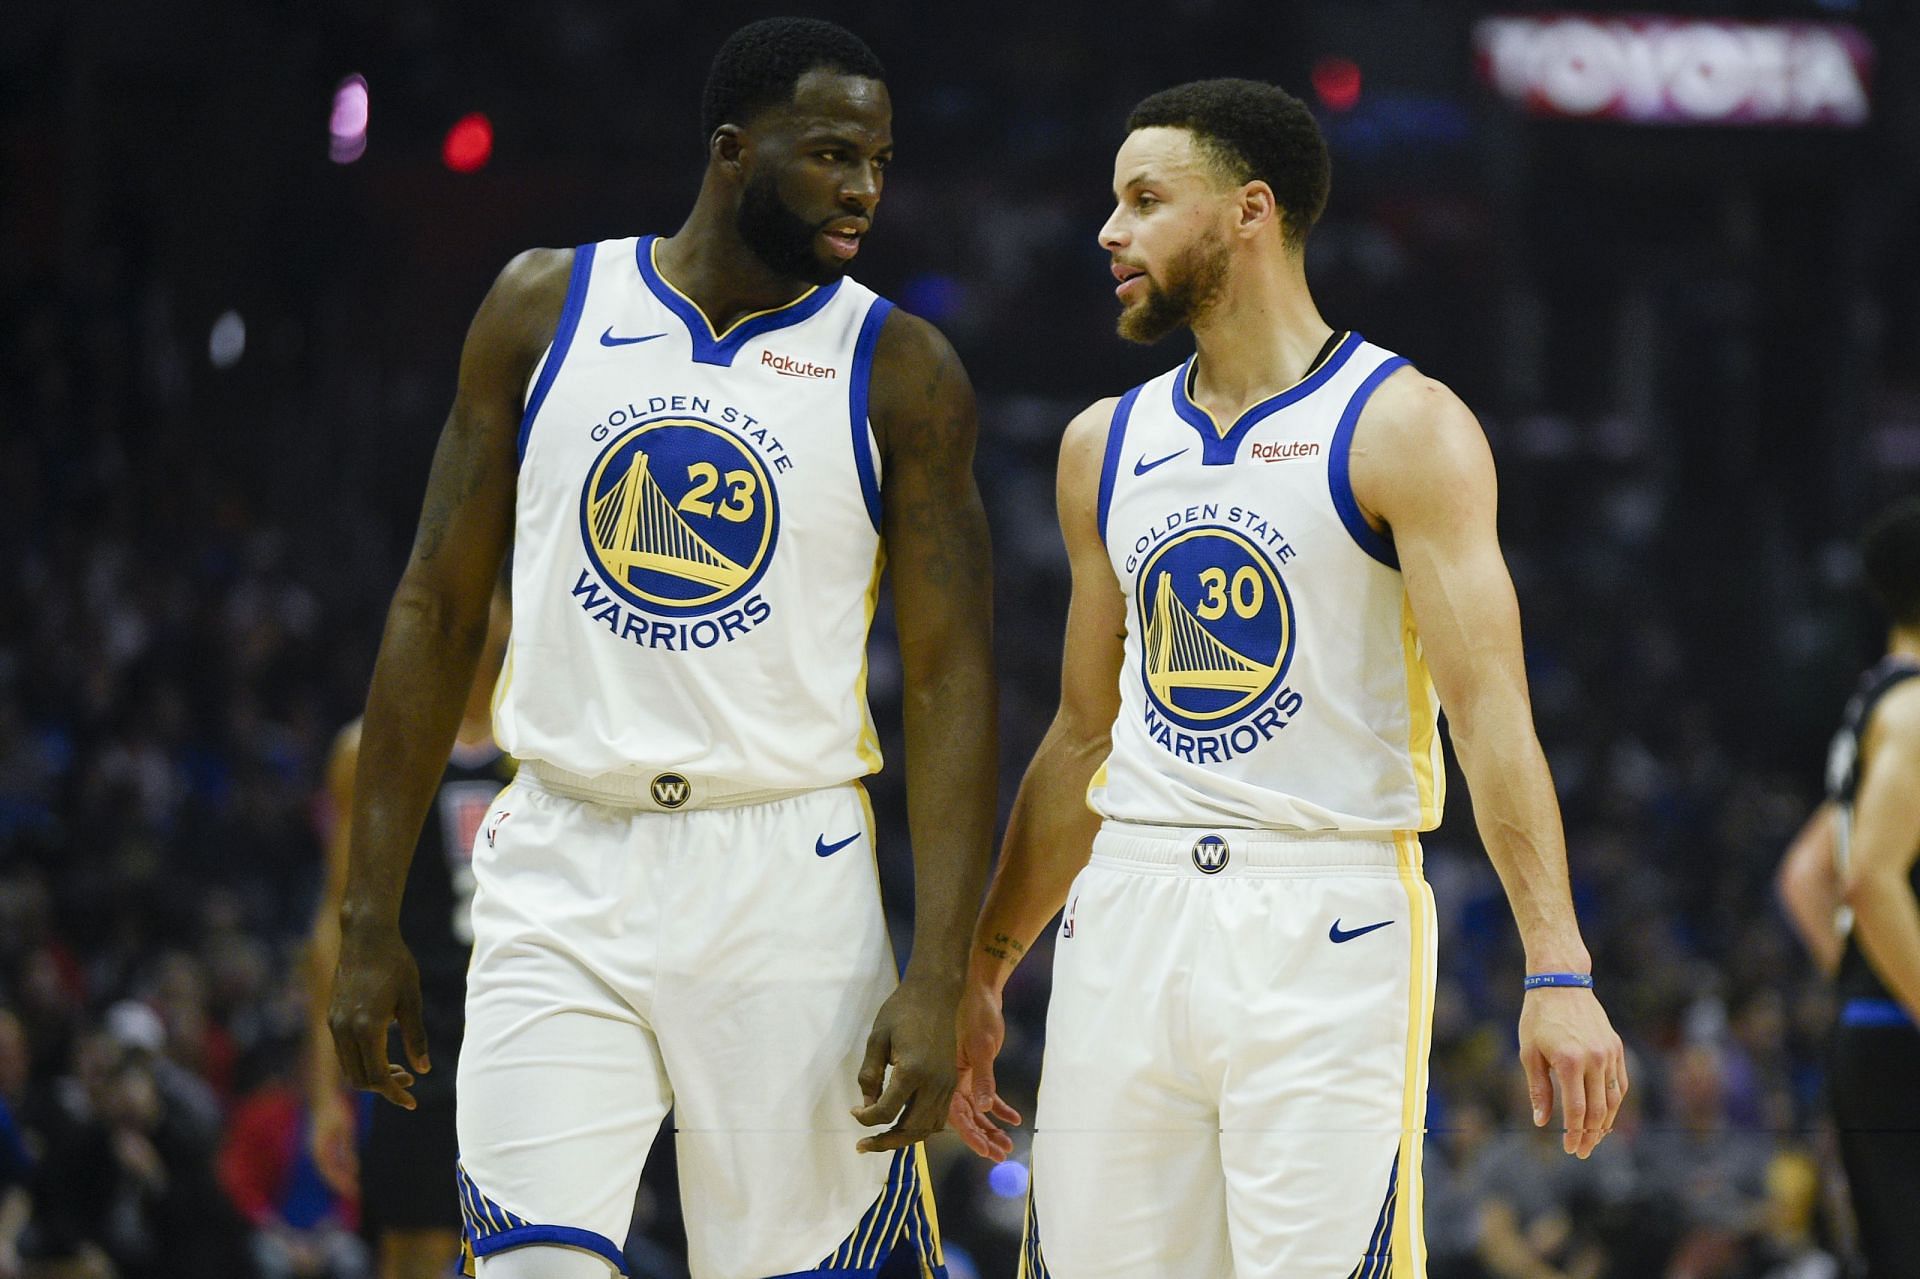 Steph Curry and Drymond Green also poked fun at Charles Barkley after the Golden State Warriors entered the NBA Finals. [Photo: FanSided]